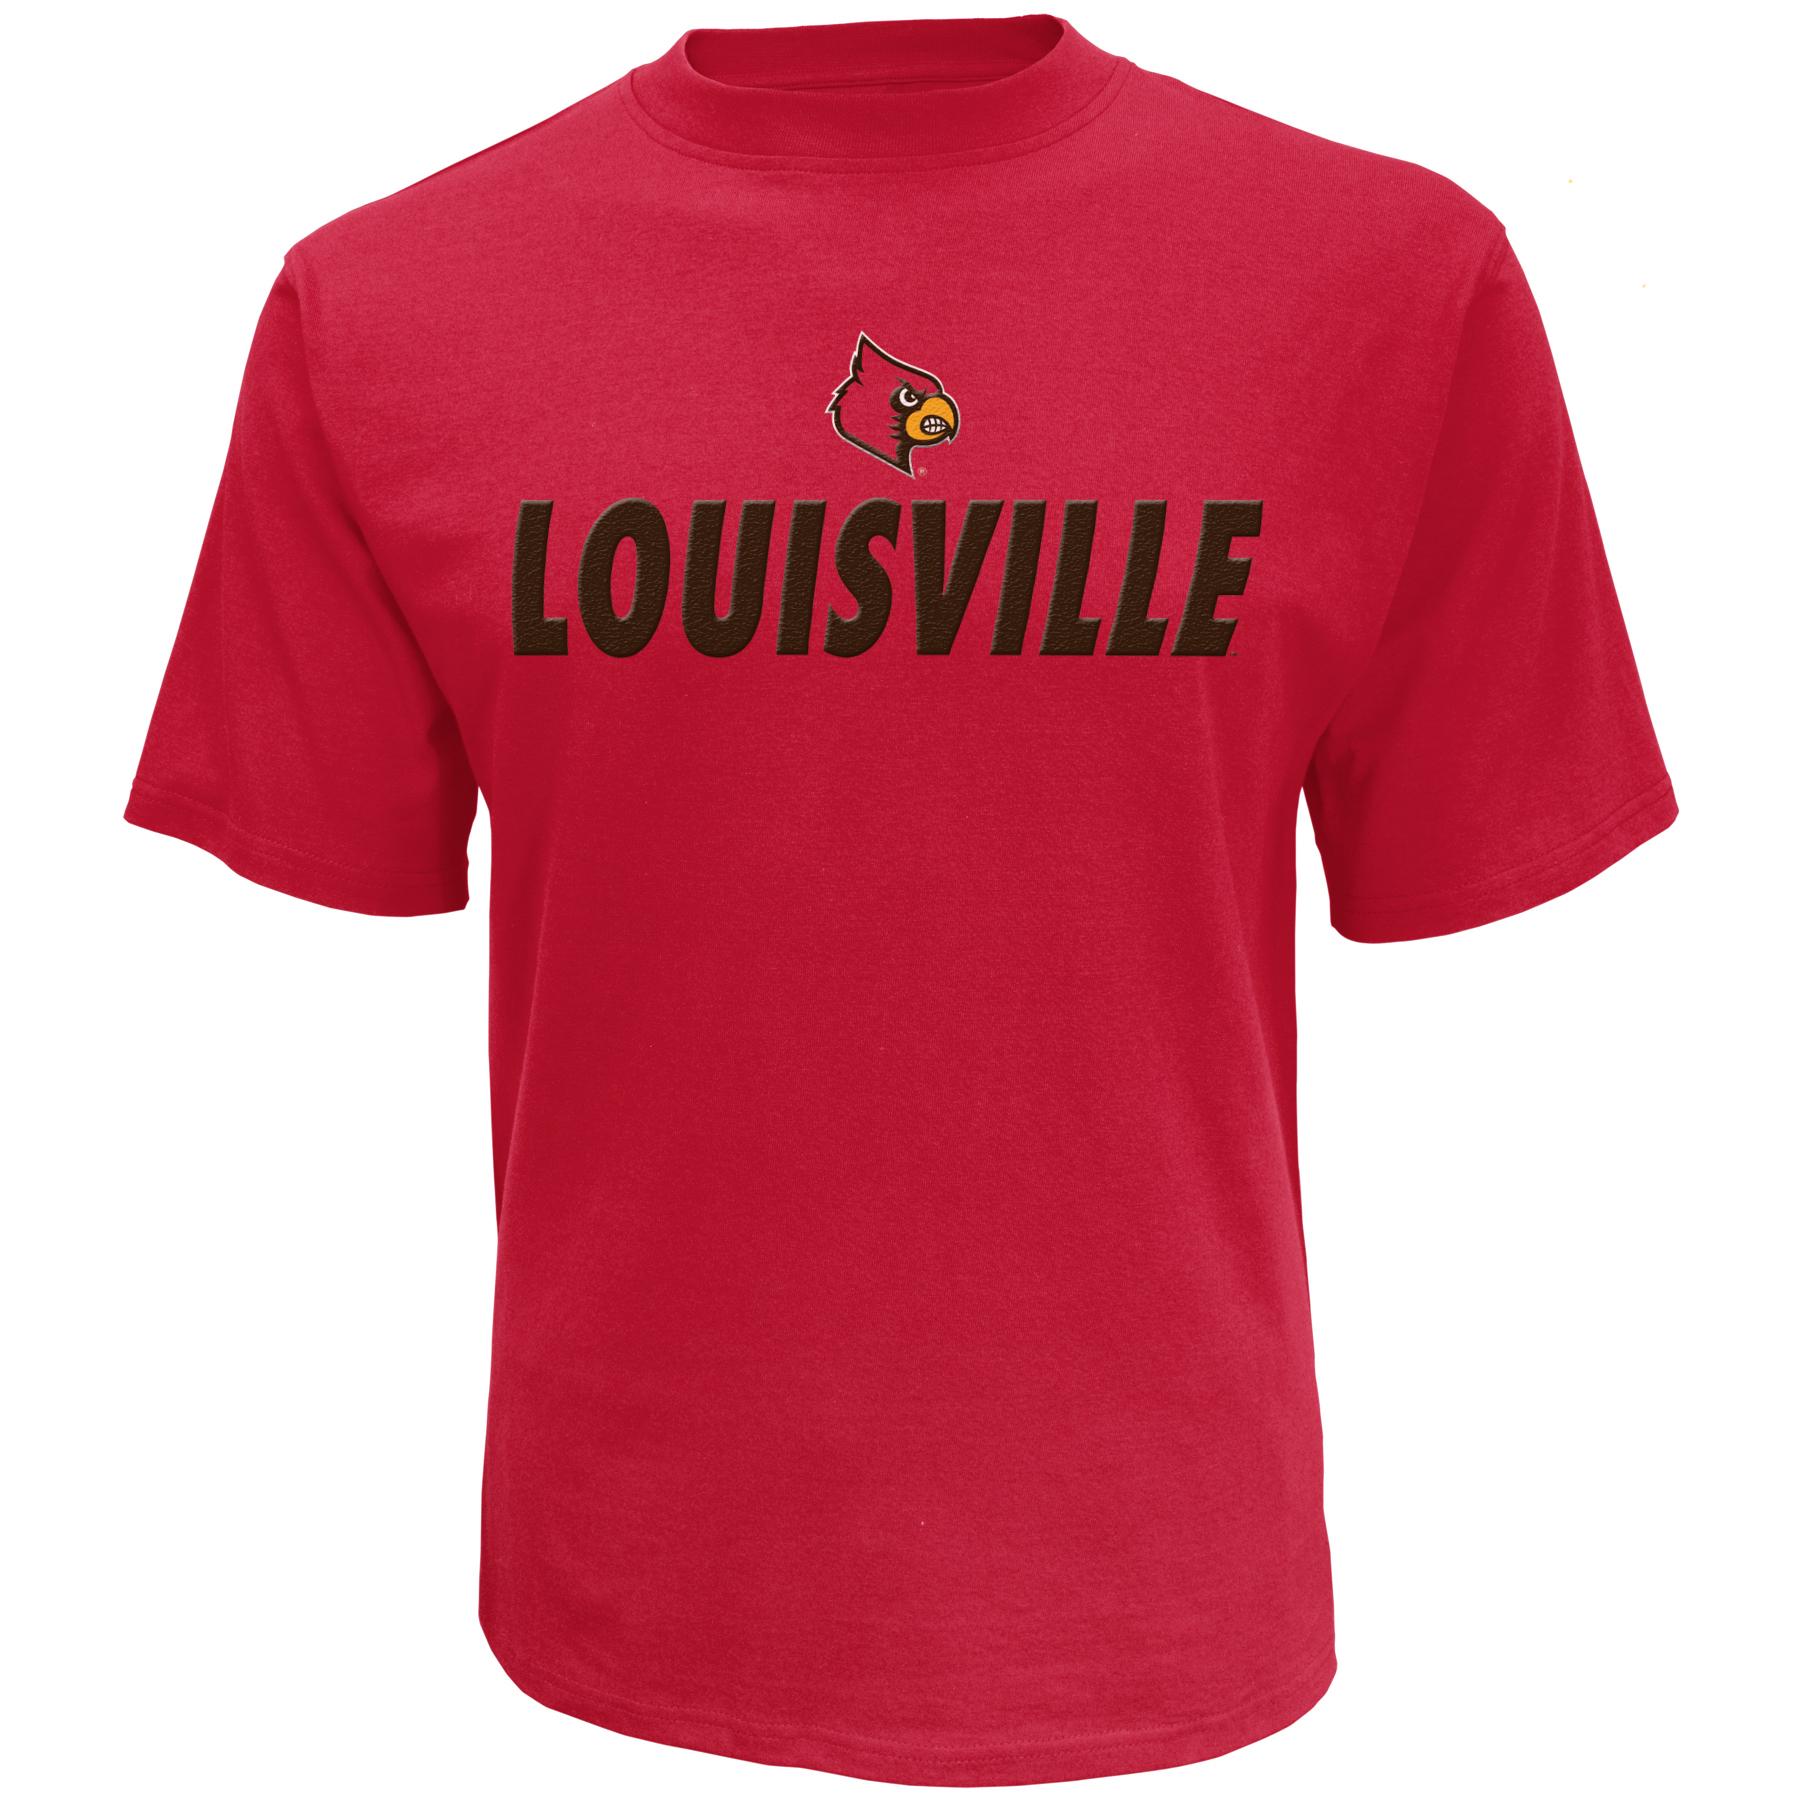 NCAA Men's Embroidered Graphic T-Shirt - Louisville Cardinals